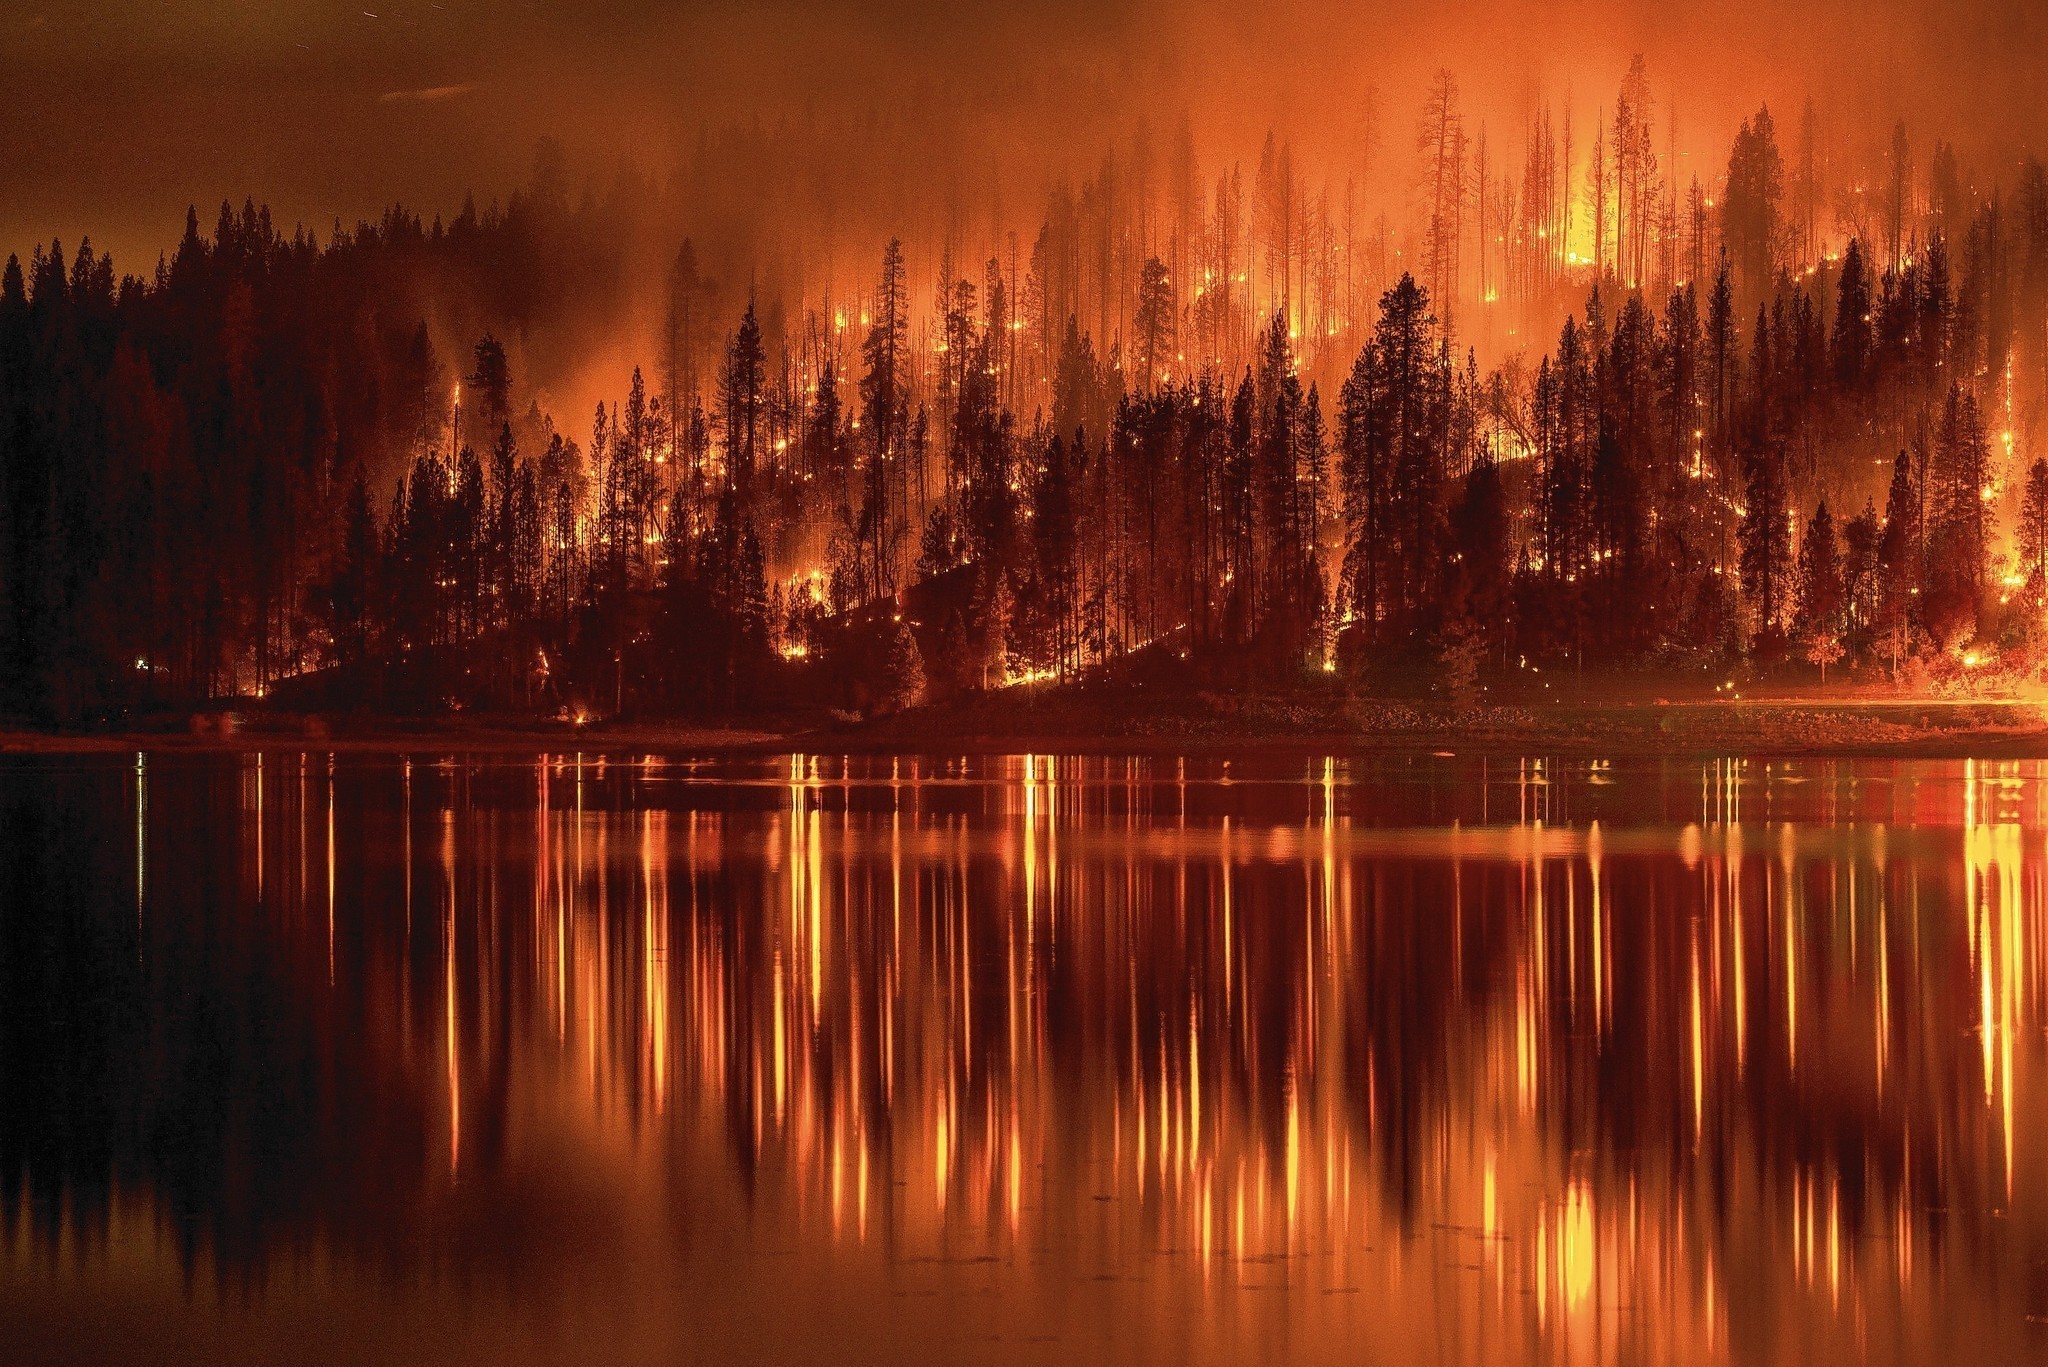 General 2048x1367 fire forest lake reflection hell orange nature burning low light